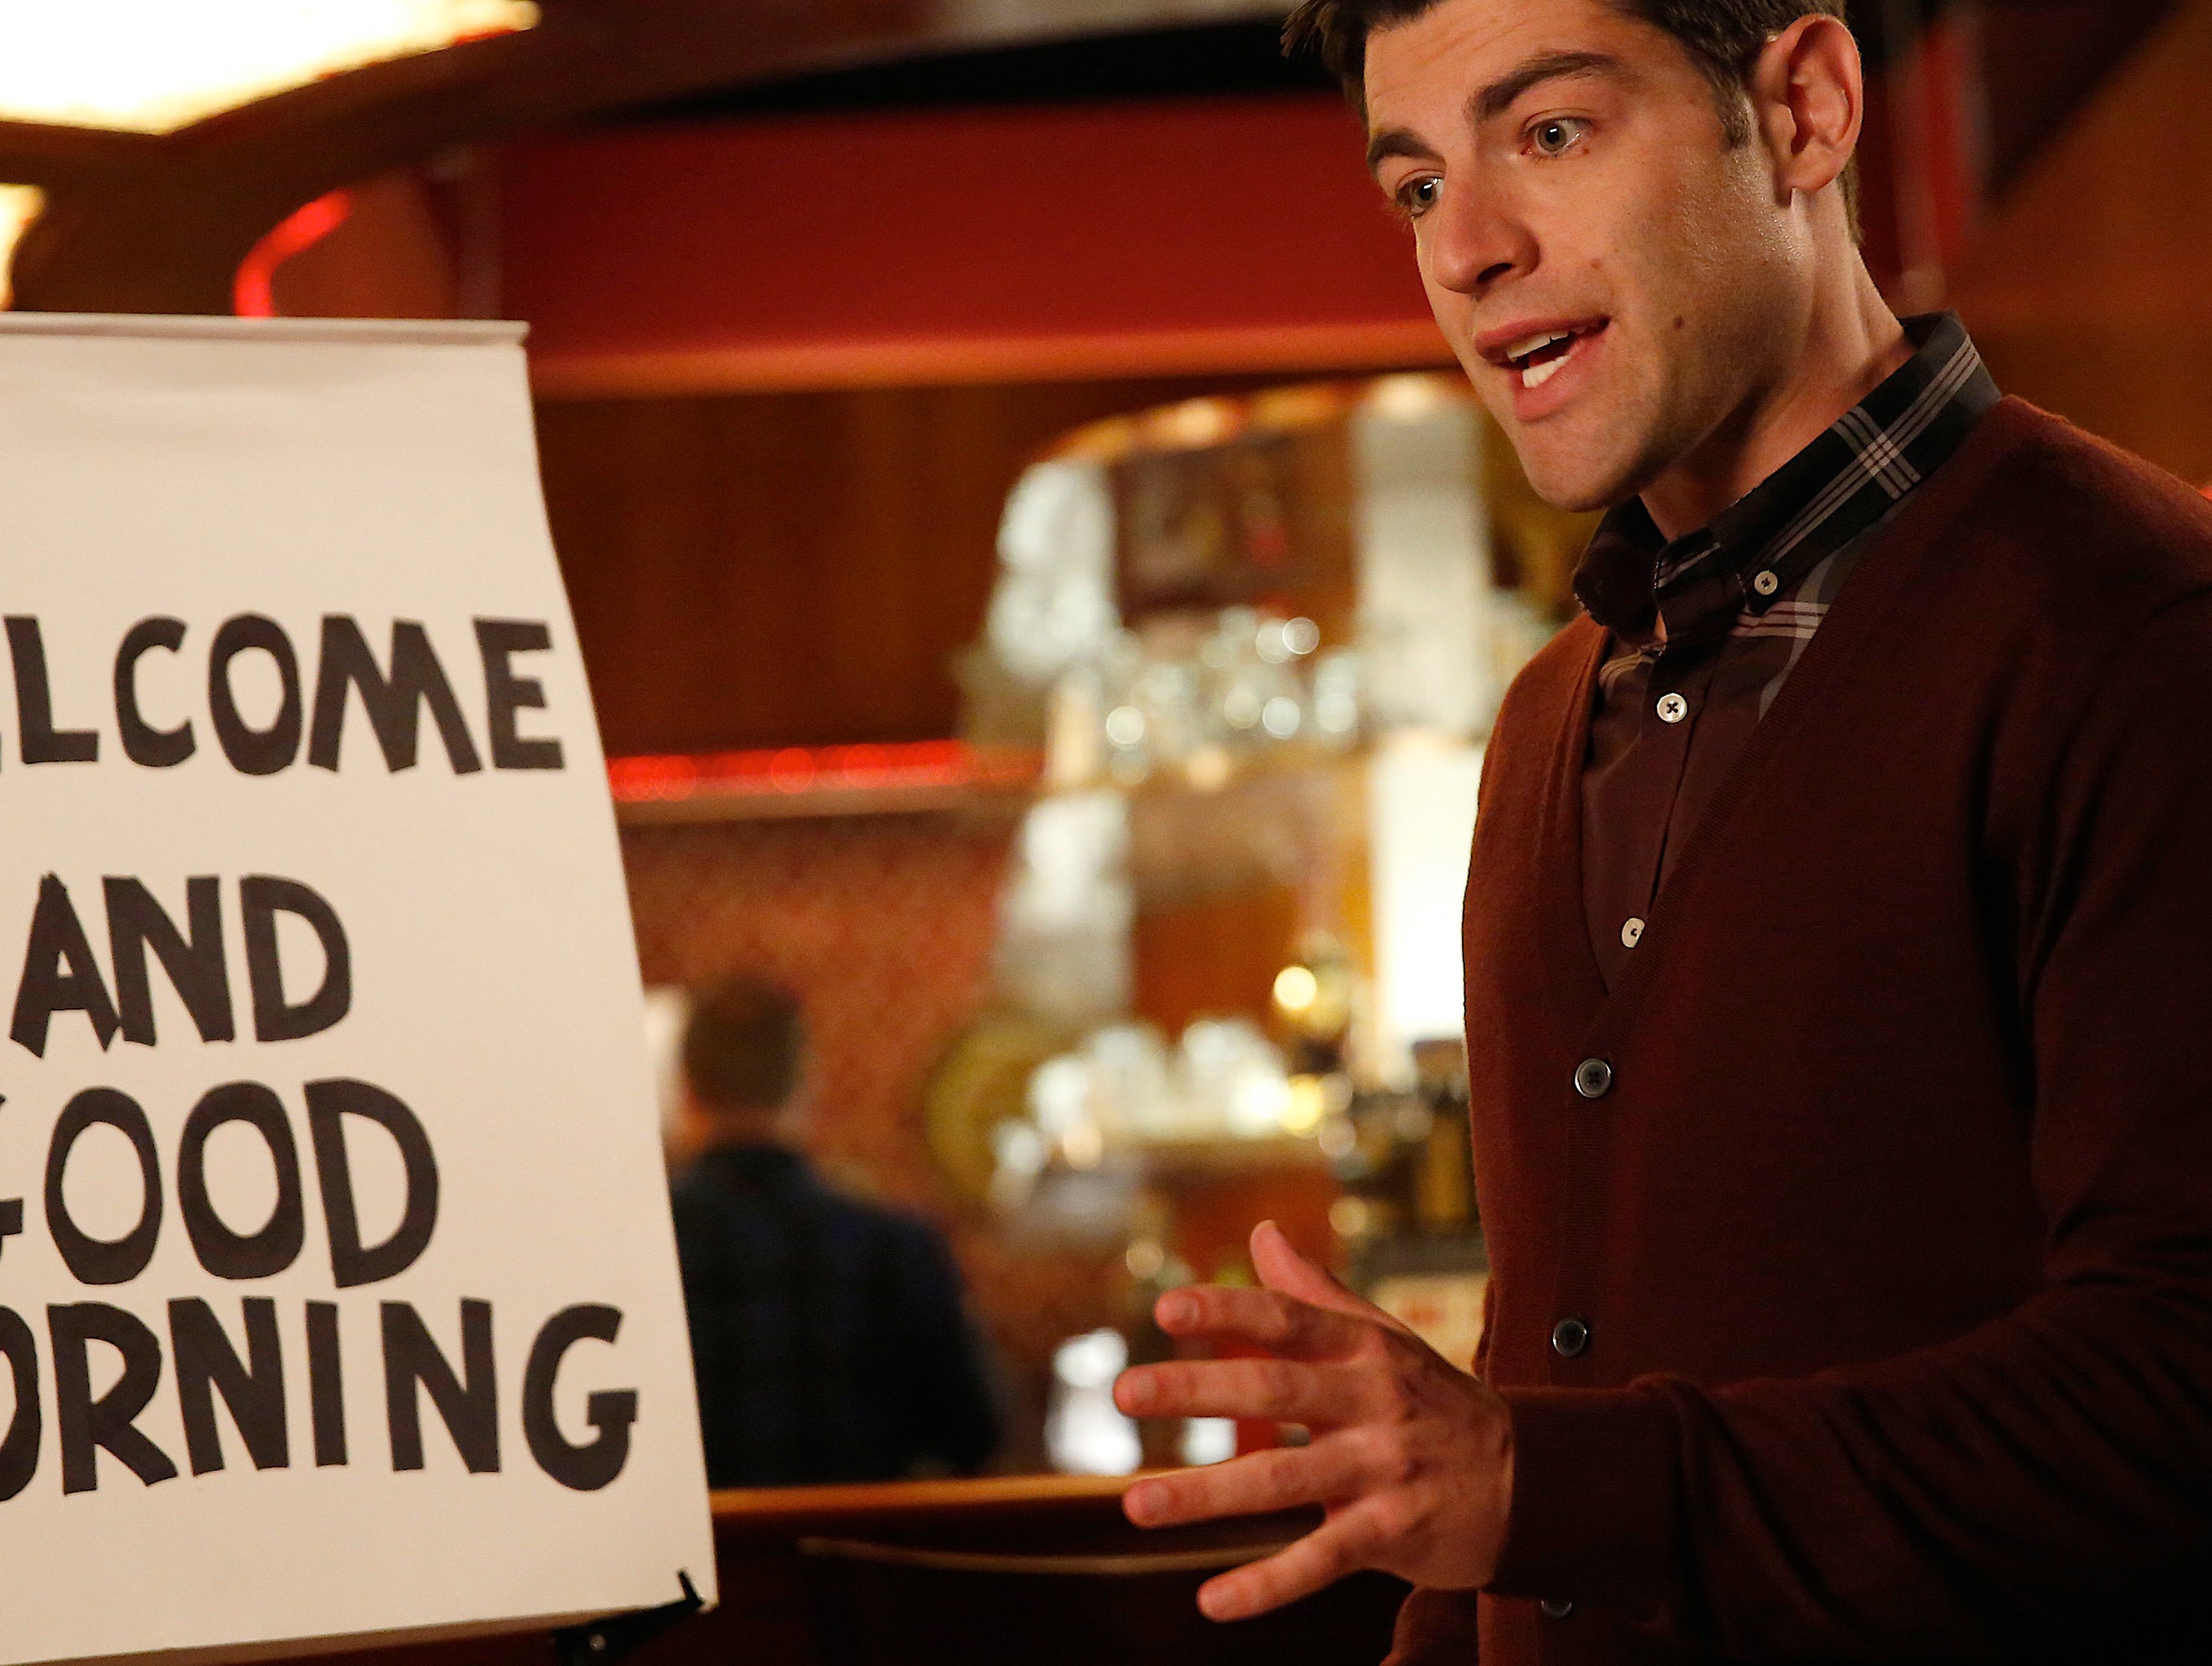 Man standing in a room with a sign saying &quot;WELCOME AND GOOD MORNING.&quot;